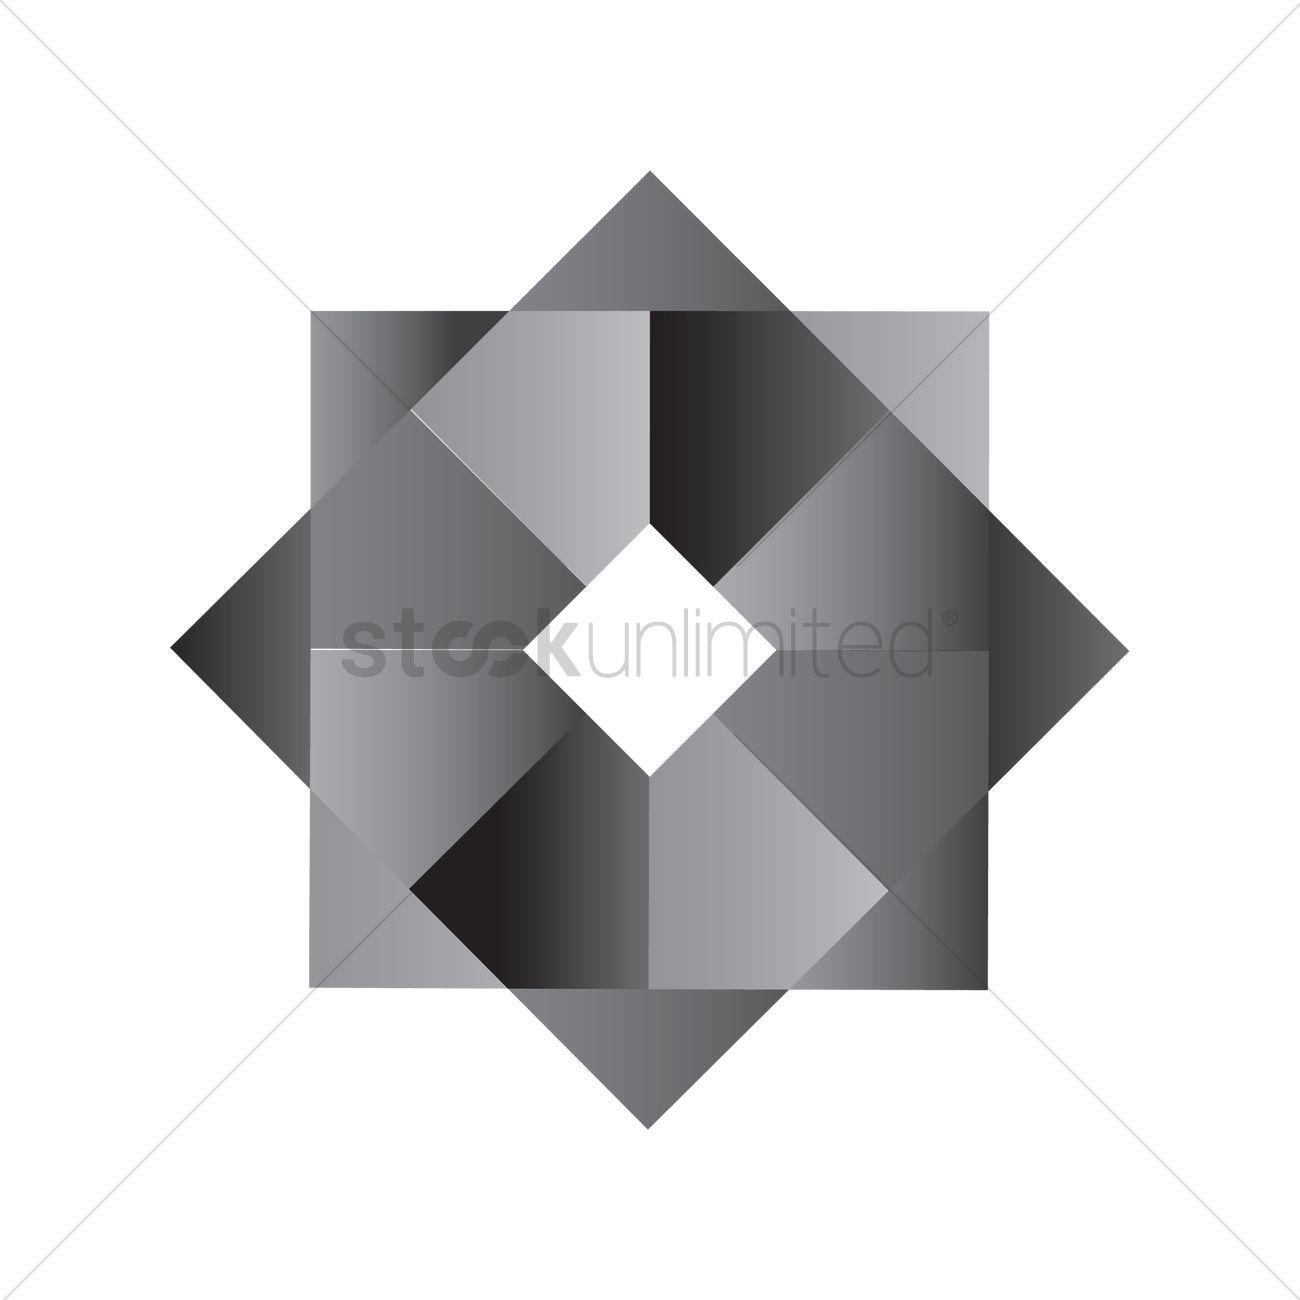 Black Octagon Logo - Free Geometric octagon in black and white colors Vector Image ...